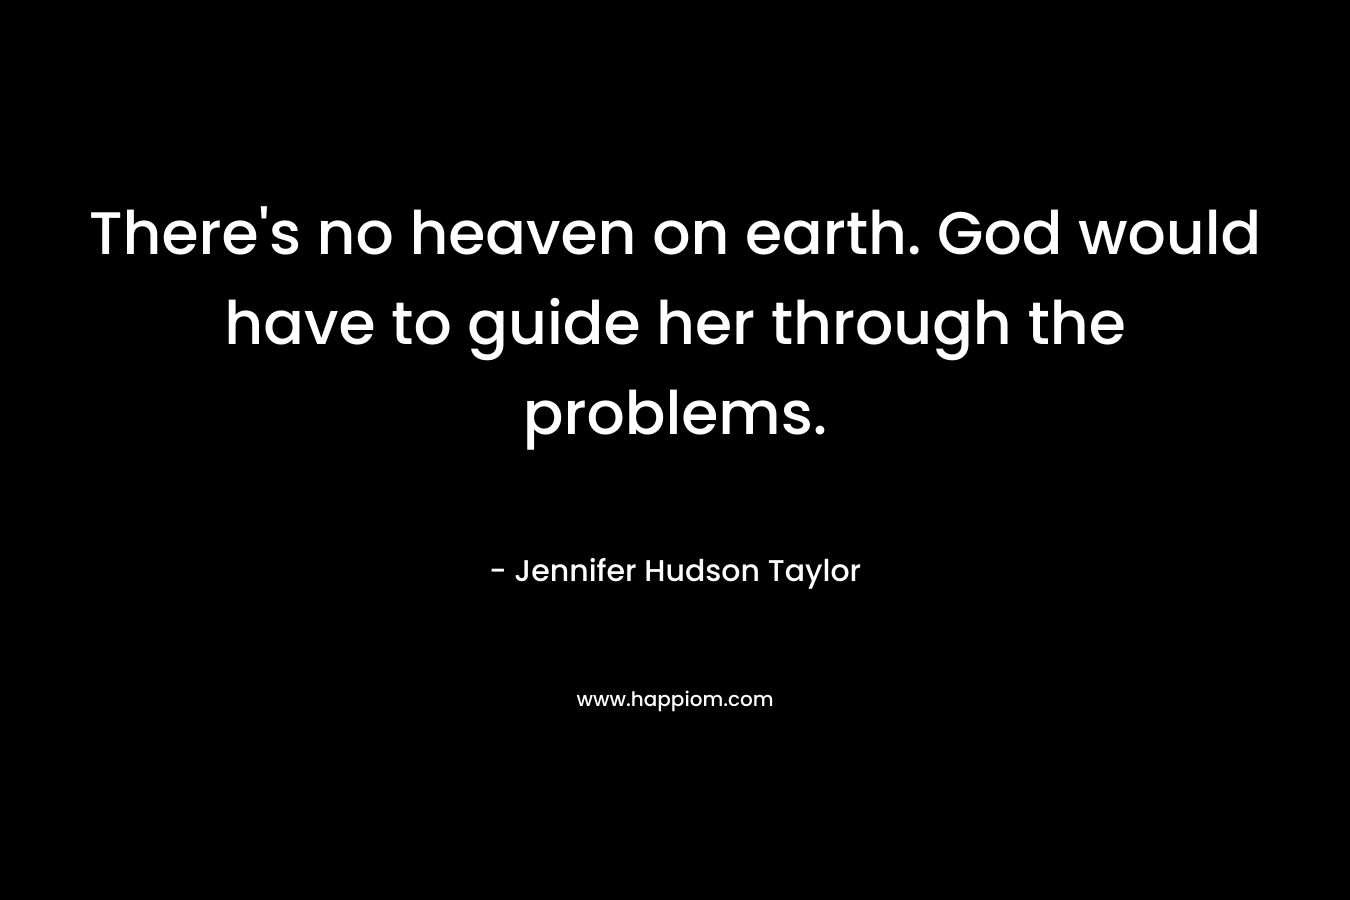 There's no heaven on earth. God would have to guide her through the problems.